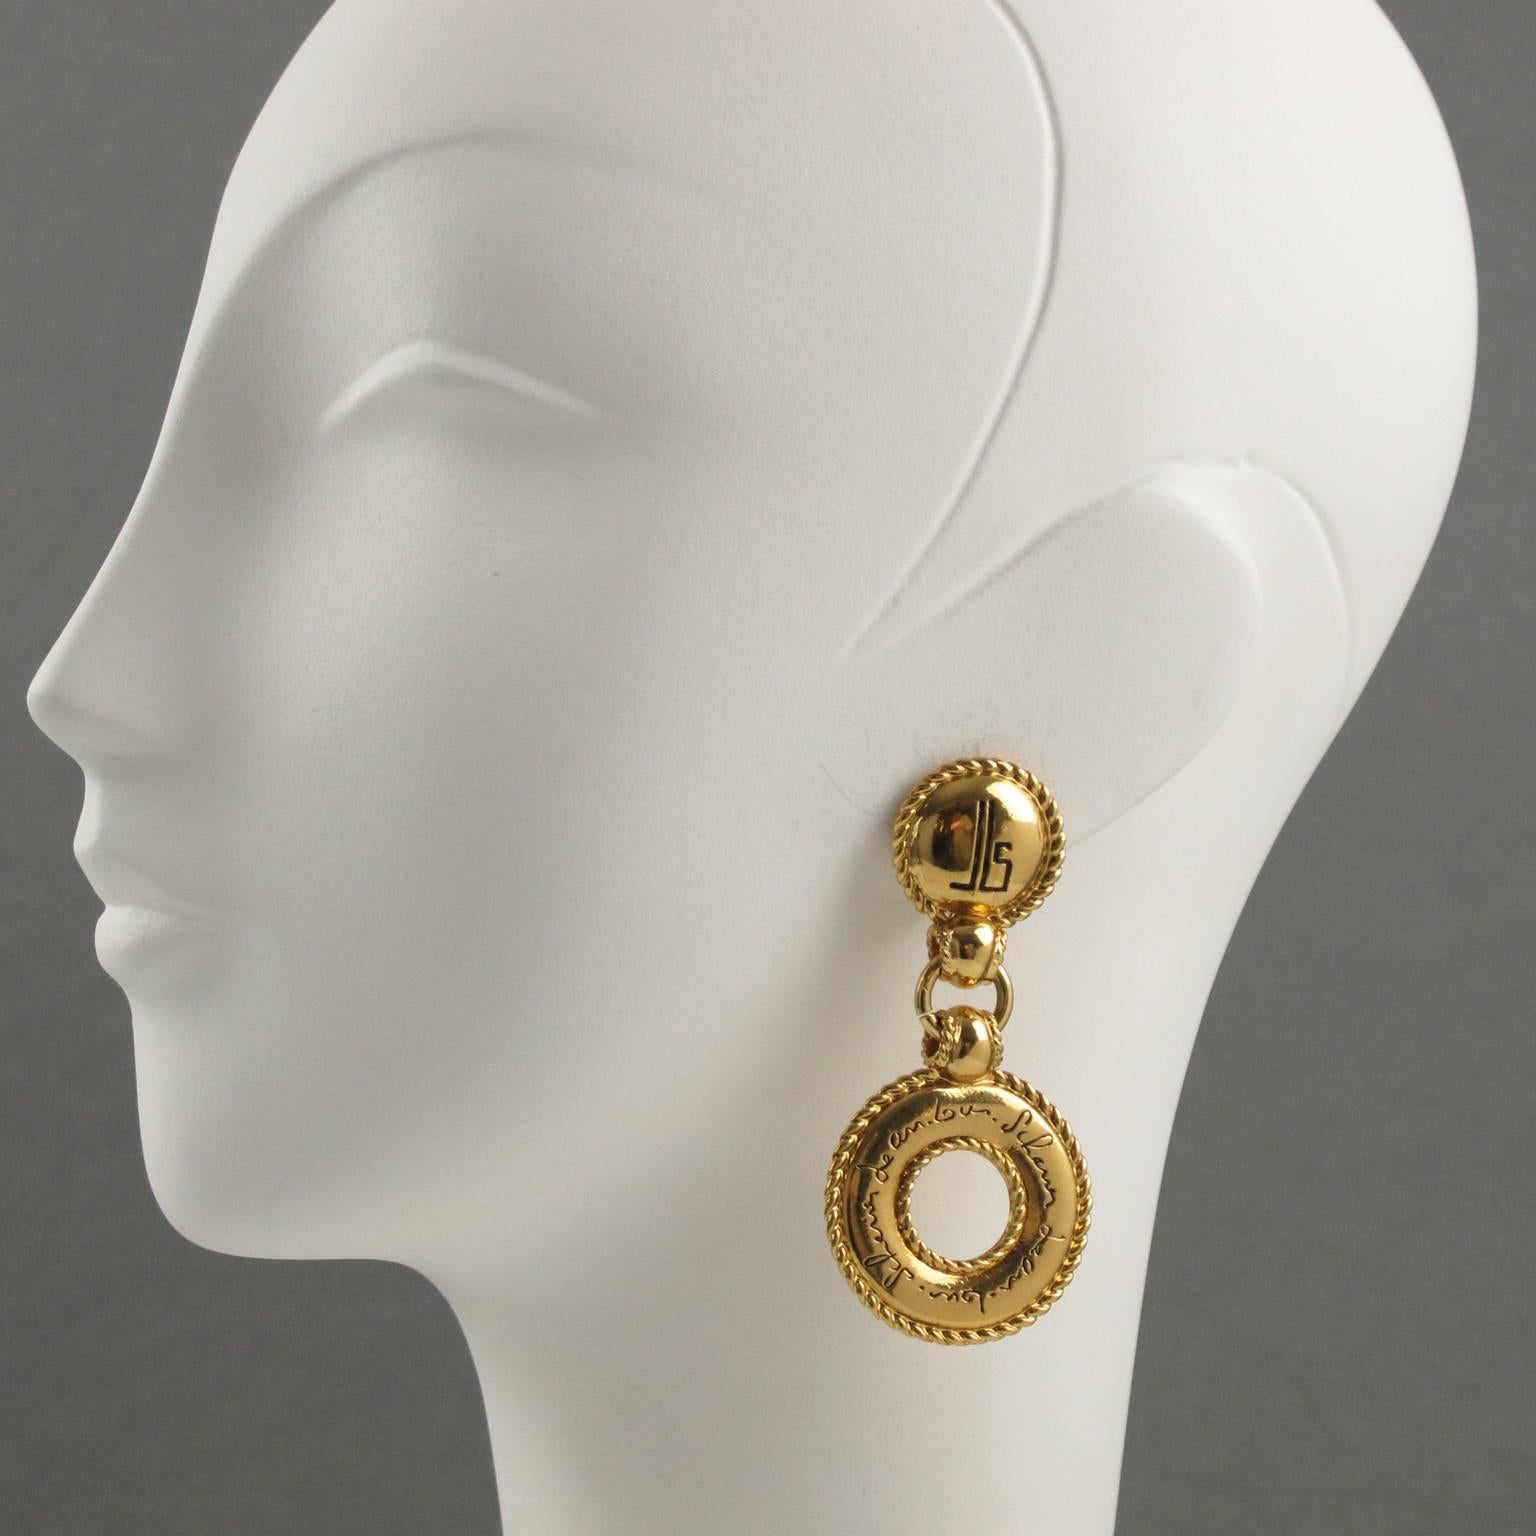 French Jewelry designer JEAN LOUIS SCHERRER Paris signed clip on earrings. Couture dangling shape, shinny gilt metal with carving, see thru and texture ornate with black contrasted engraved brand logo and hand-written signature brand and clip back.